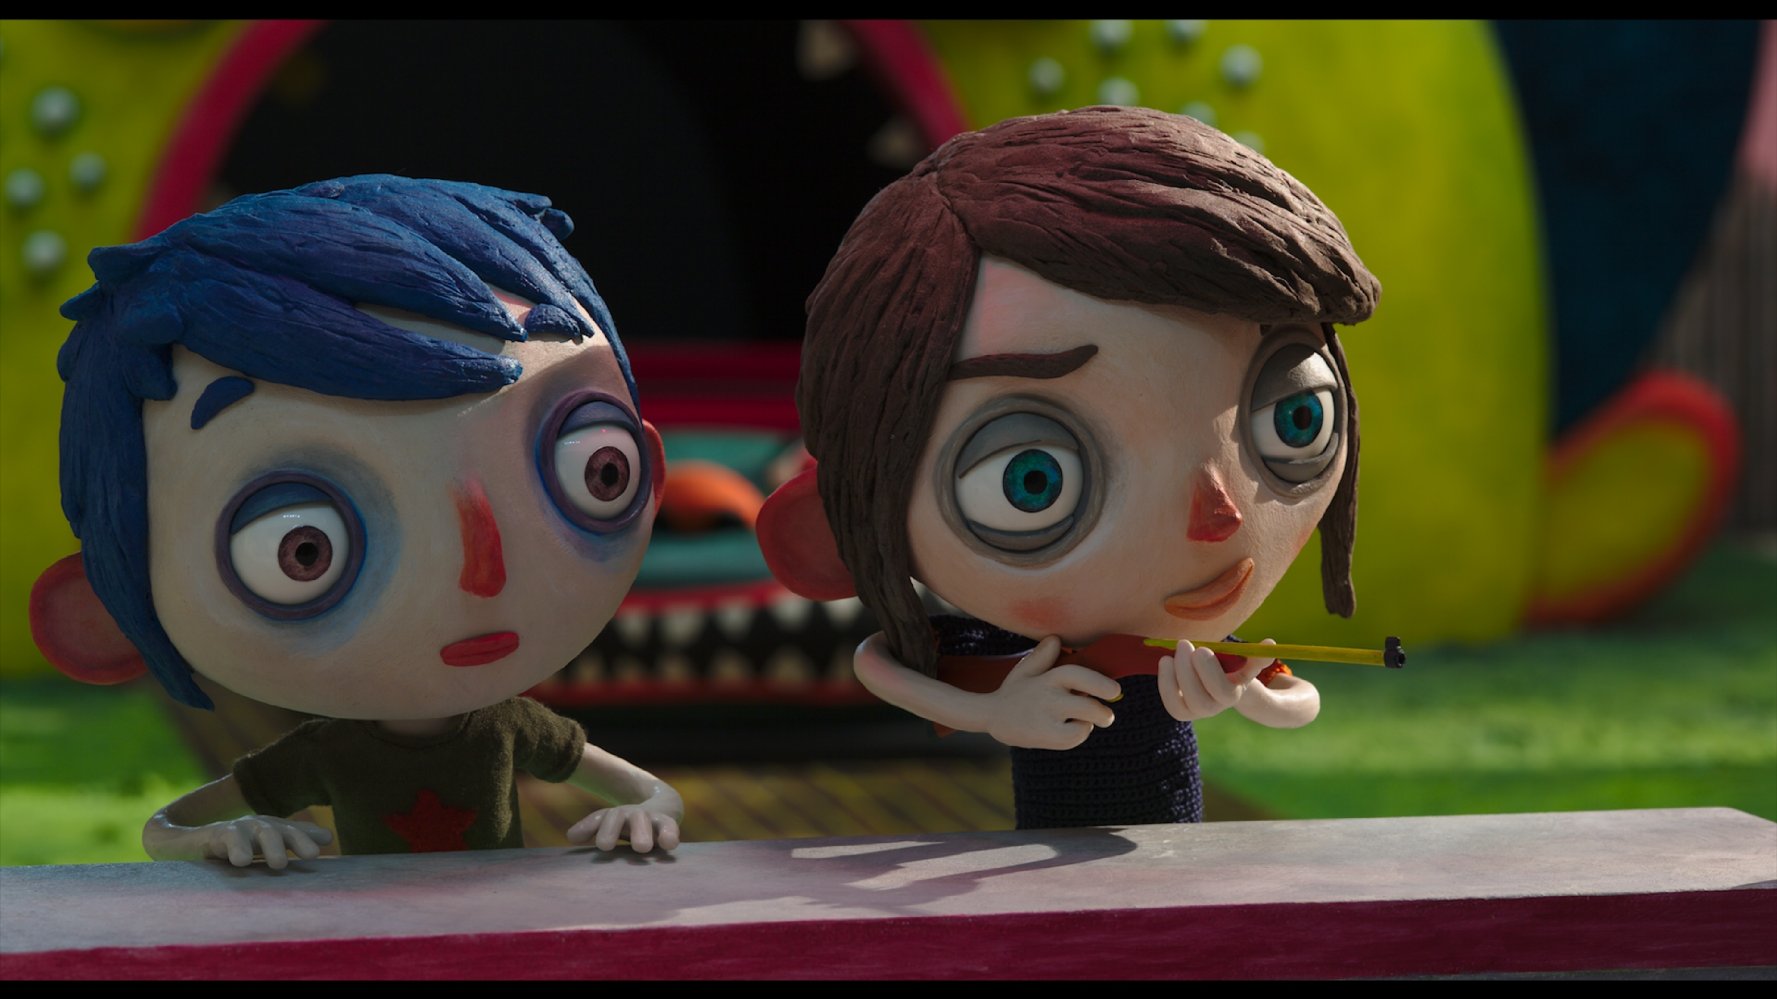 Playful Animation Grows into a Heart-wrenching Tale in <em>My Life as a Zucchini</em>